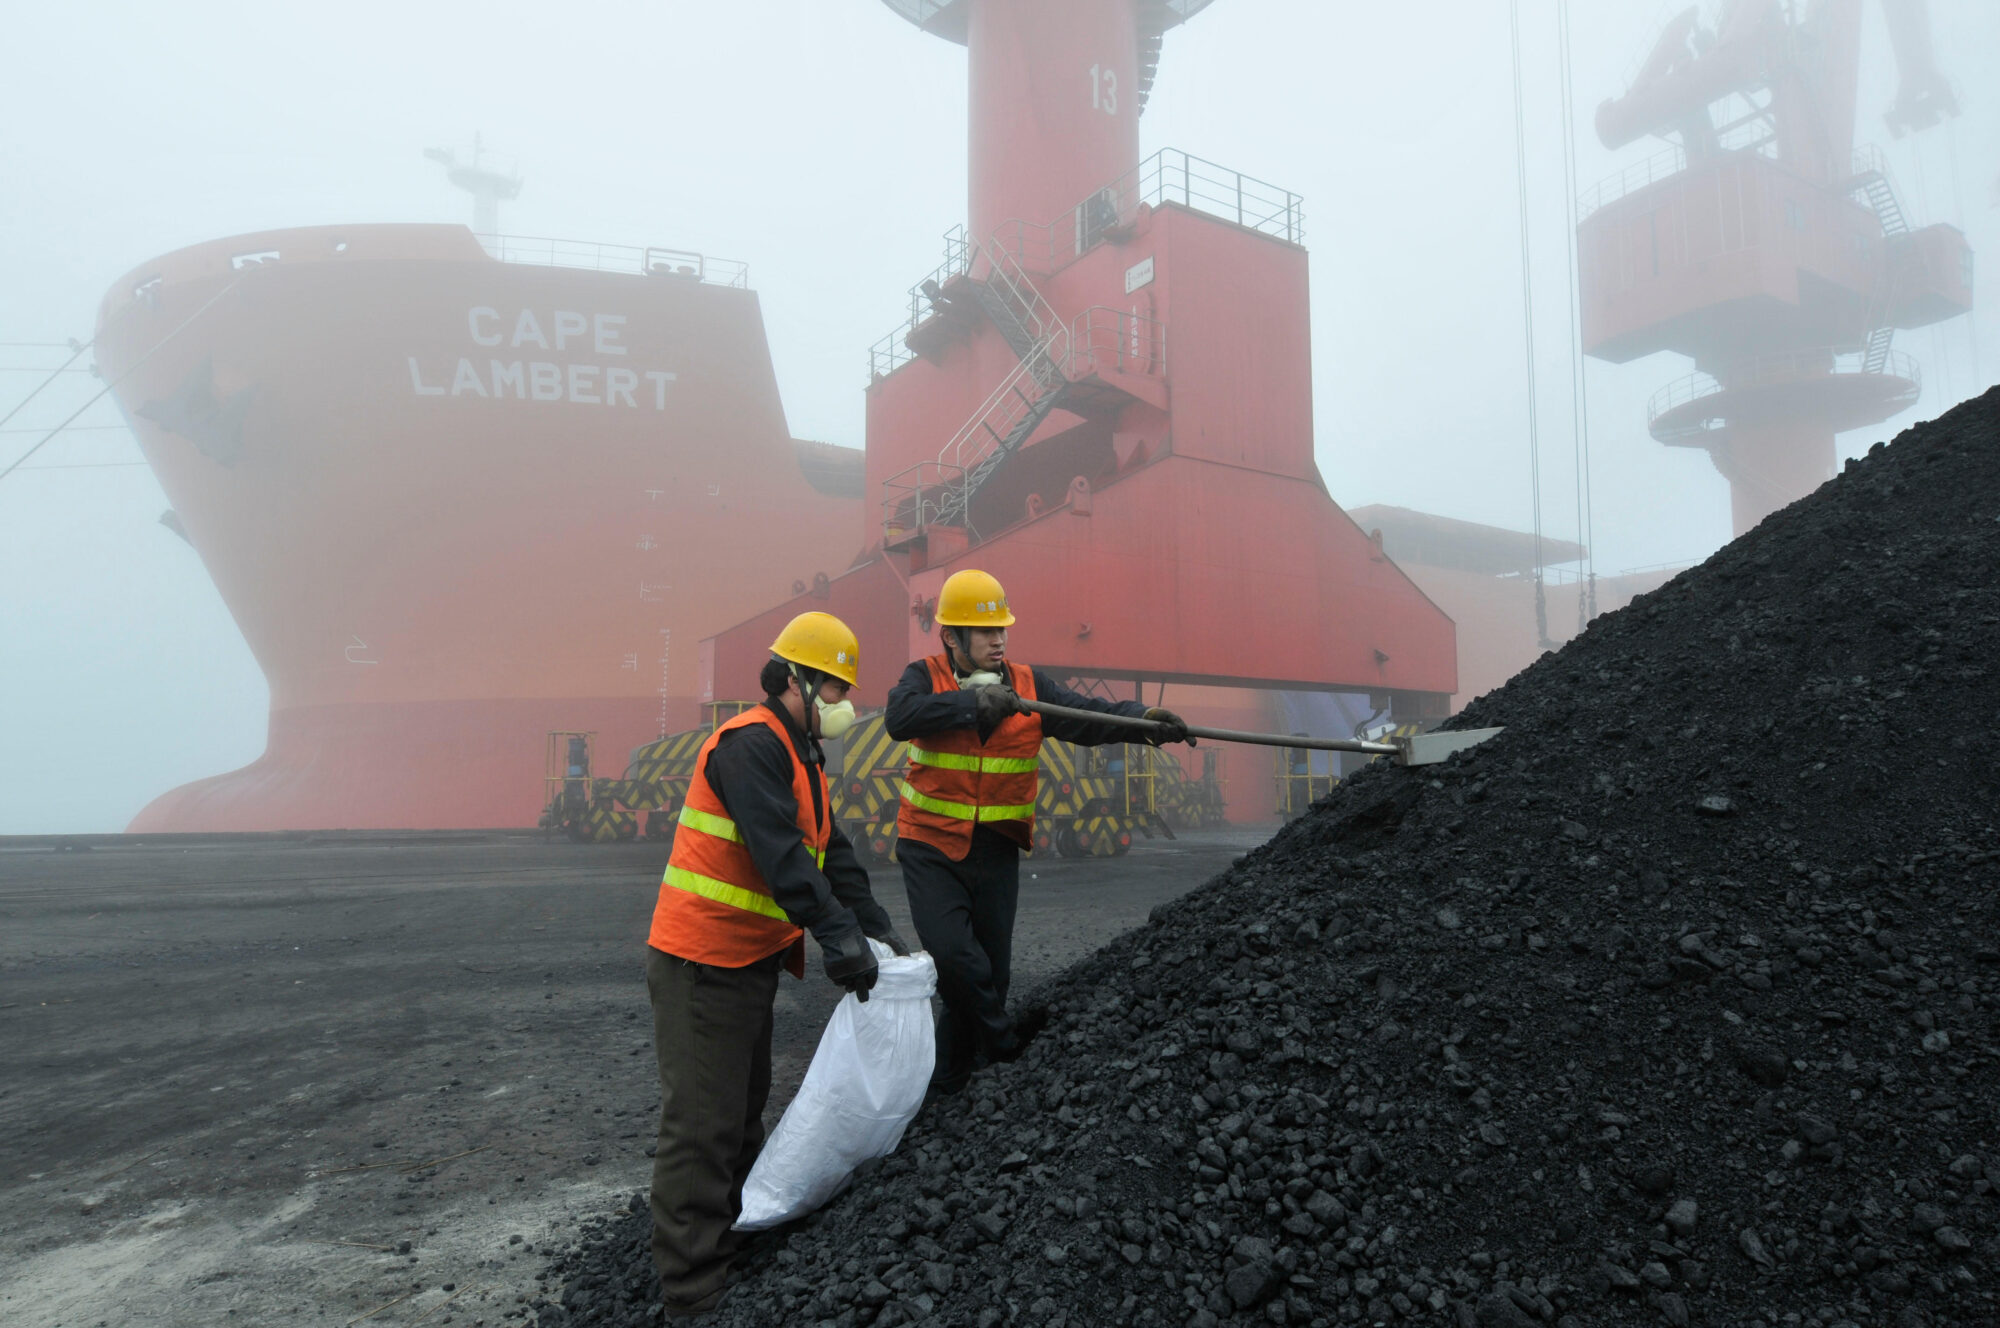 <p>Employees inspect imported coal at the Chinese port of Rizhao, Shandong province. Colombia saw its coal exports to China grow to over 3.4 million tonnes in 2021, but there are doubts over the long-term sustainability of this trade. (Image: Panda Eye / CPRESS PHOTO LIMITED / Alamy)</p>